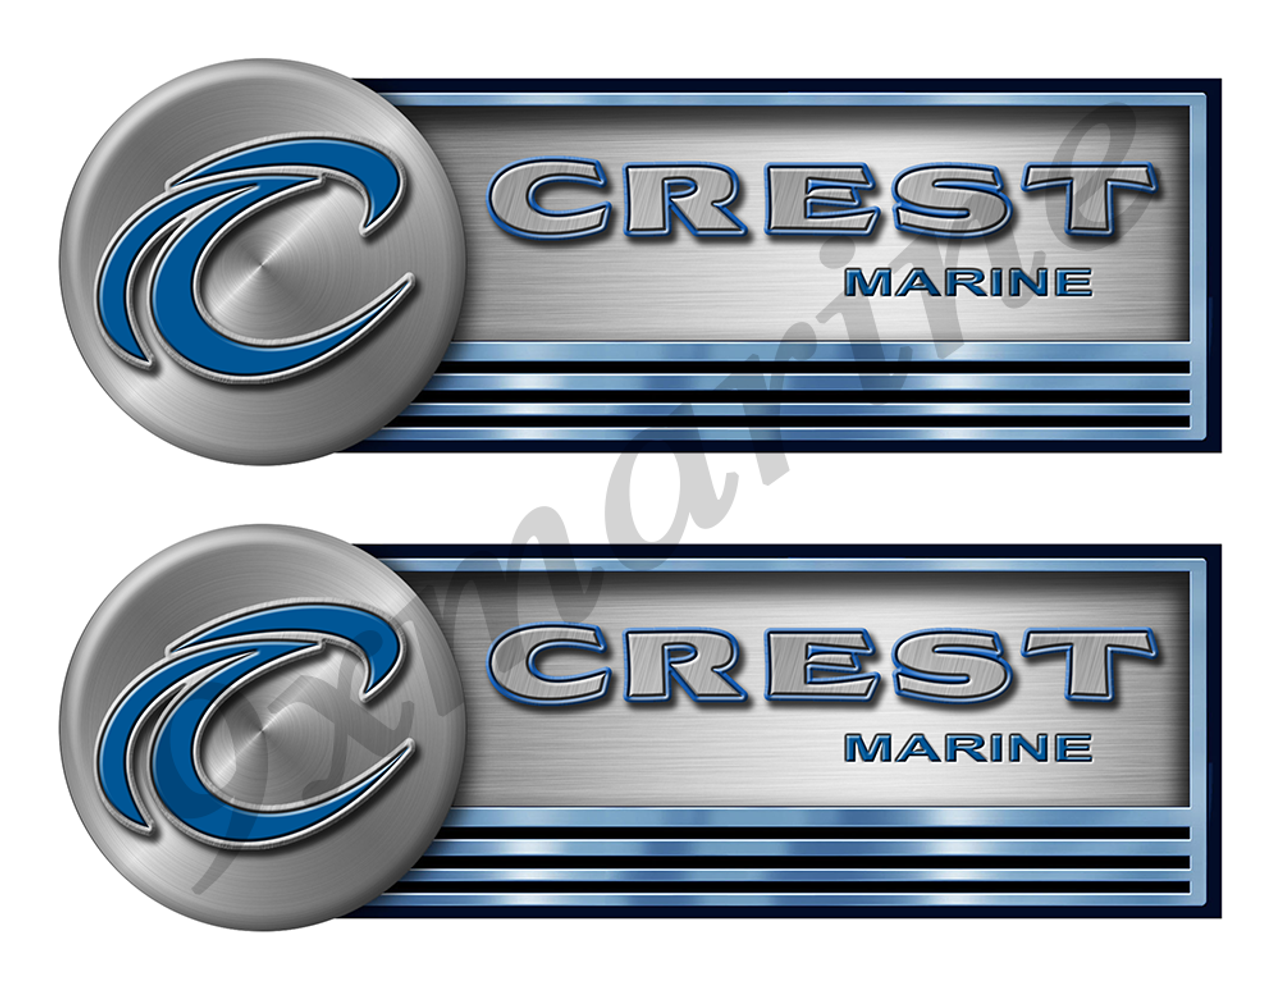 Two Crest Stickers for Boat Restoration - 10" long each